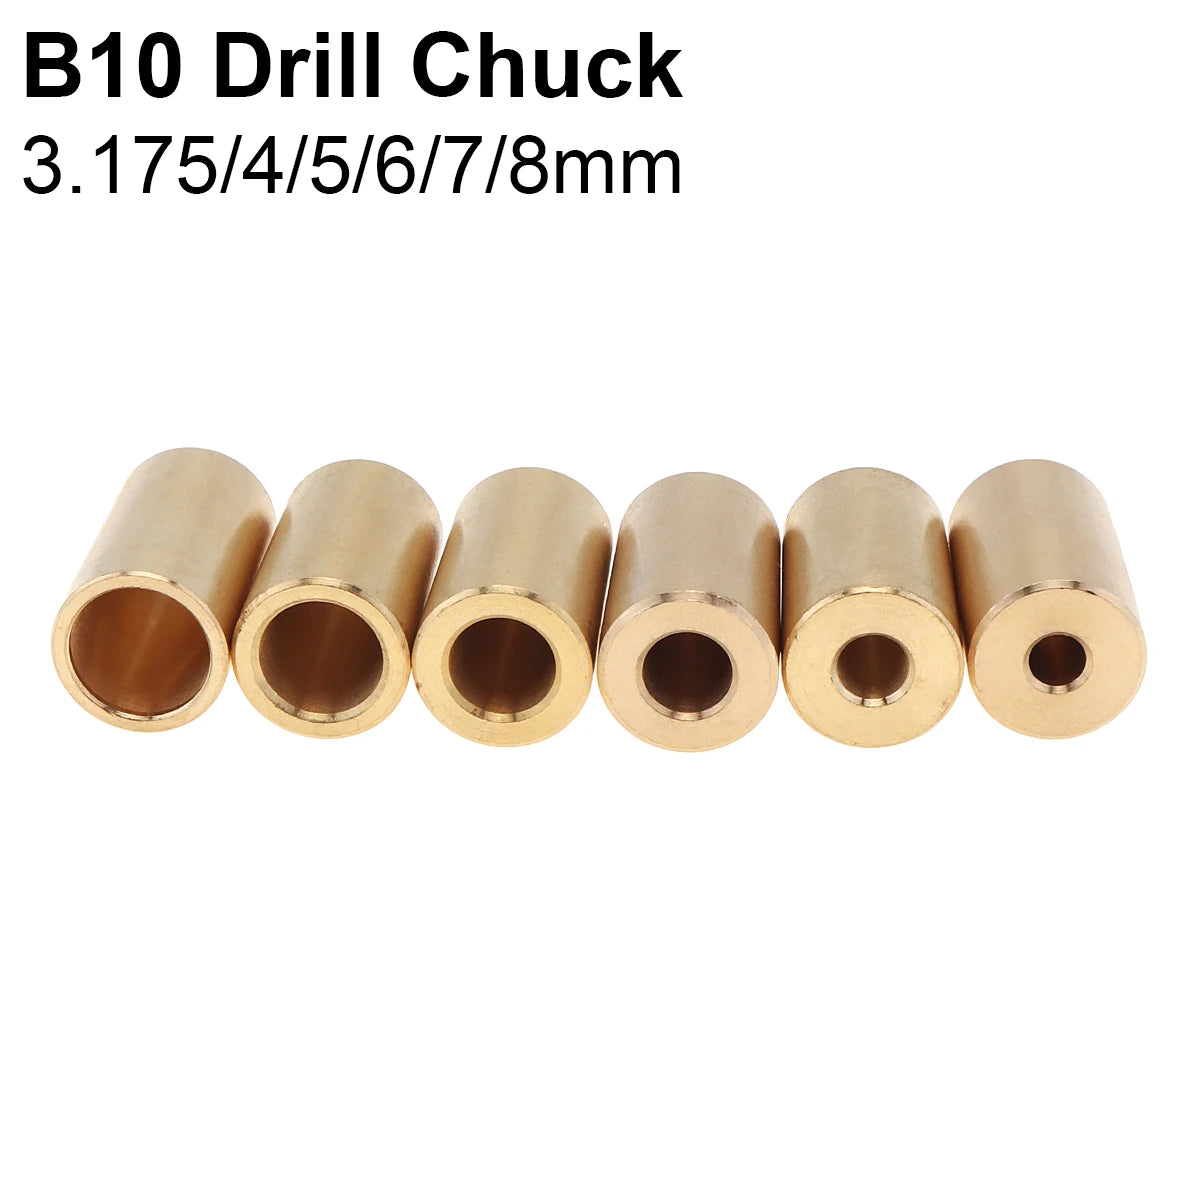 B10 Drill Chuck Connecting Rod Sleeve Copper Taper Coupling